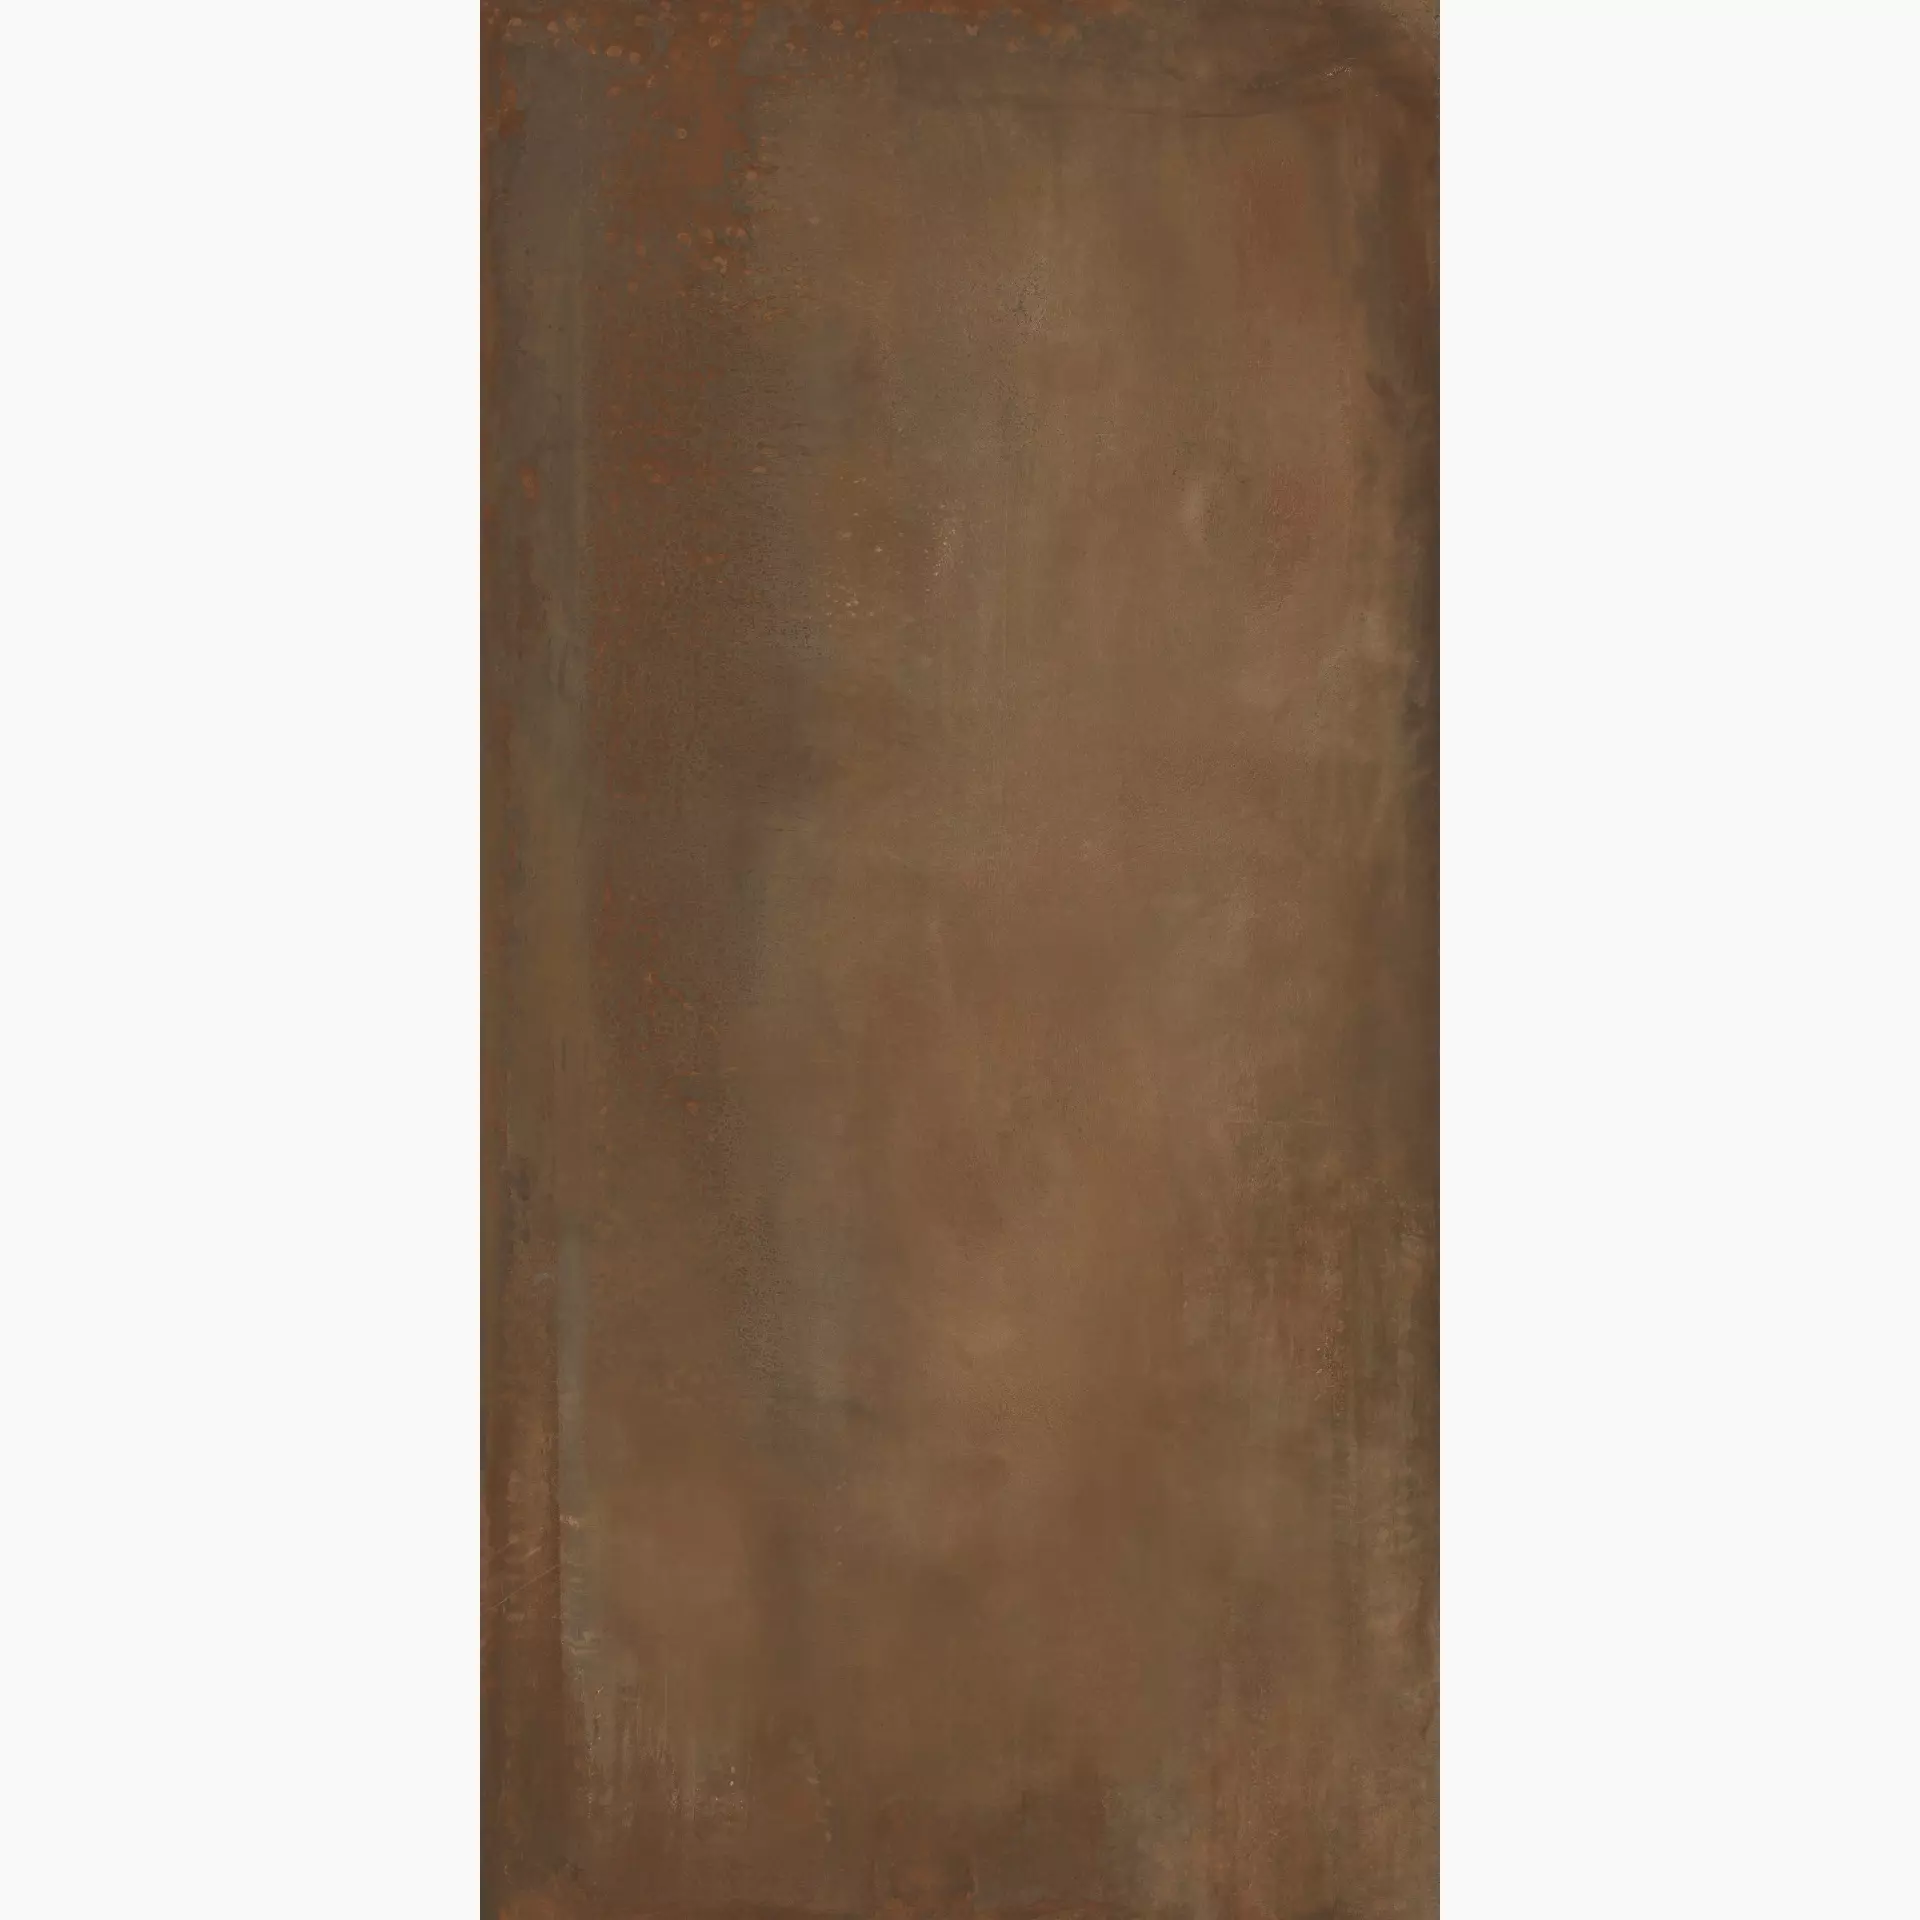 ABK Interno9 Wide Rust Naturale PF60000299 160x320cm rectified 6mm